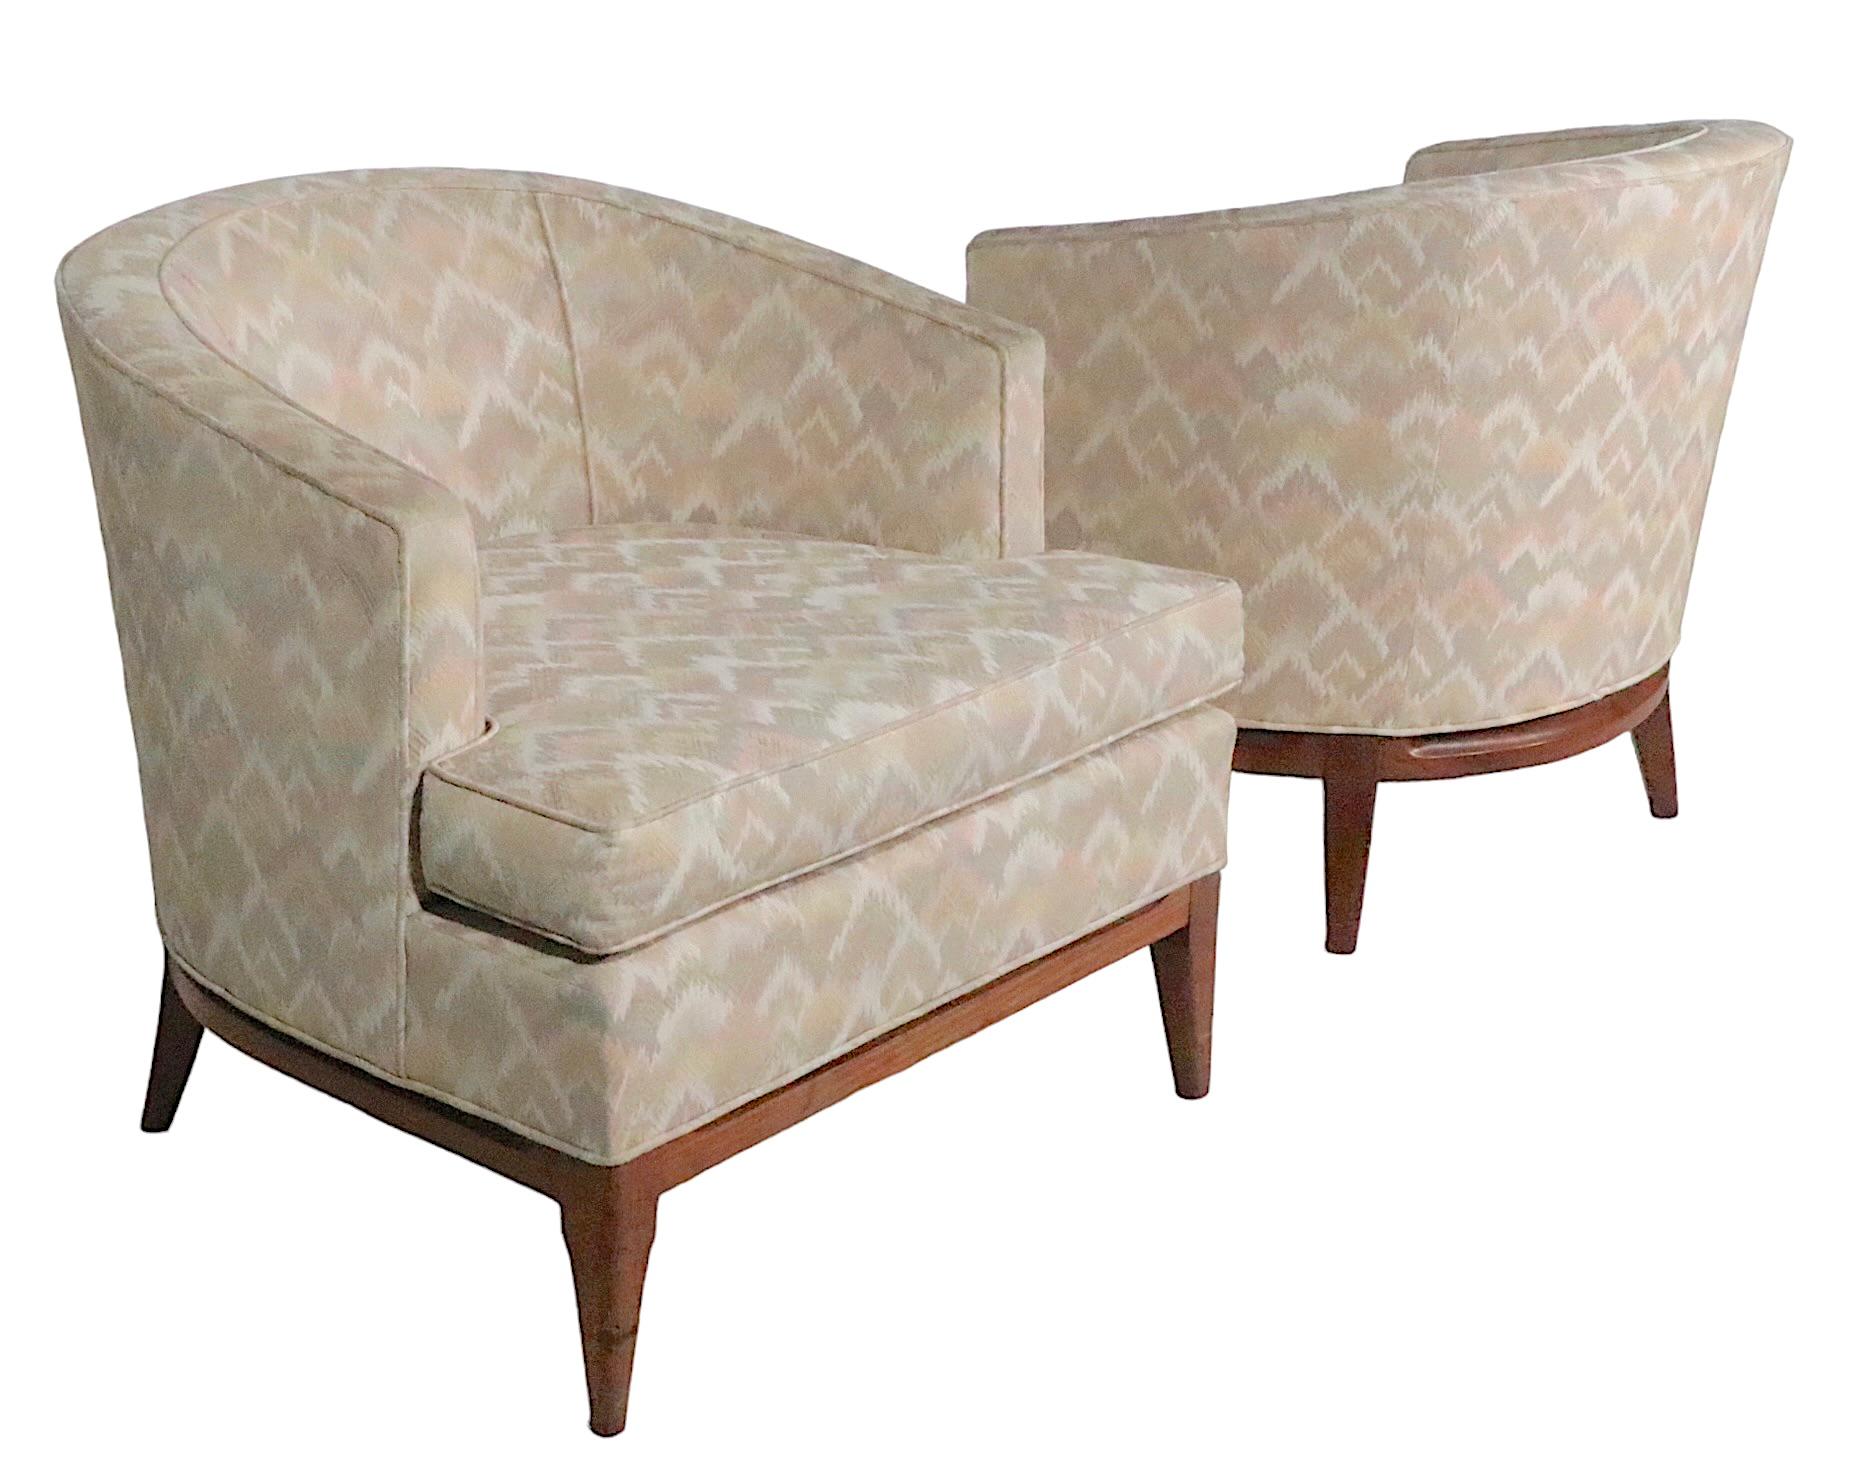 Pair. Mid Century Tub Chairs After Robsjohn Gibbings, circa 1950 - 1960s For Sale 1